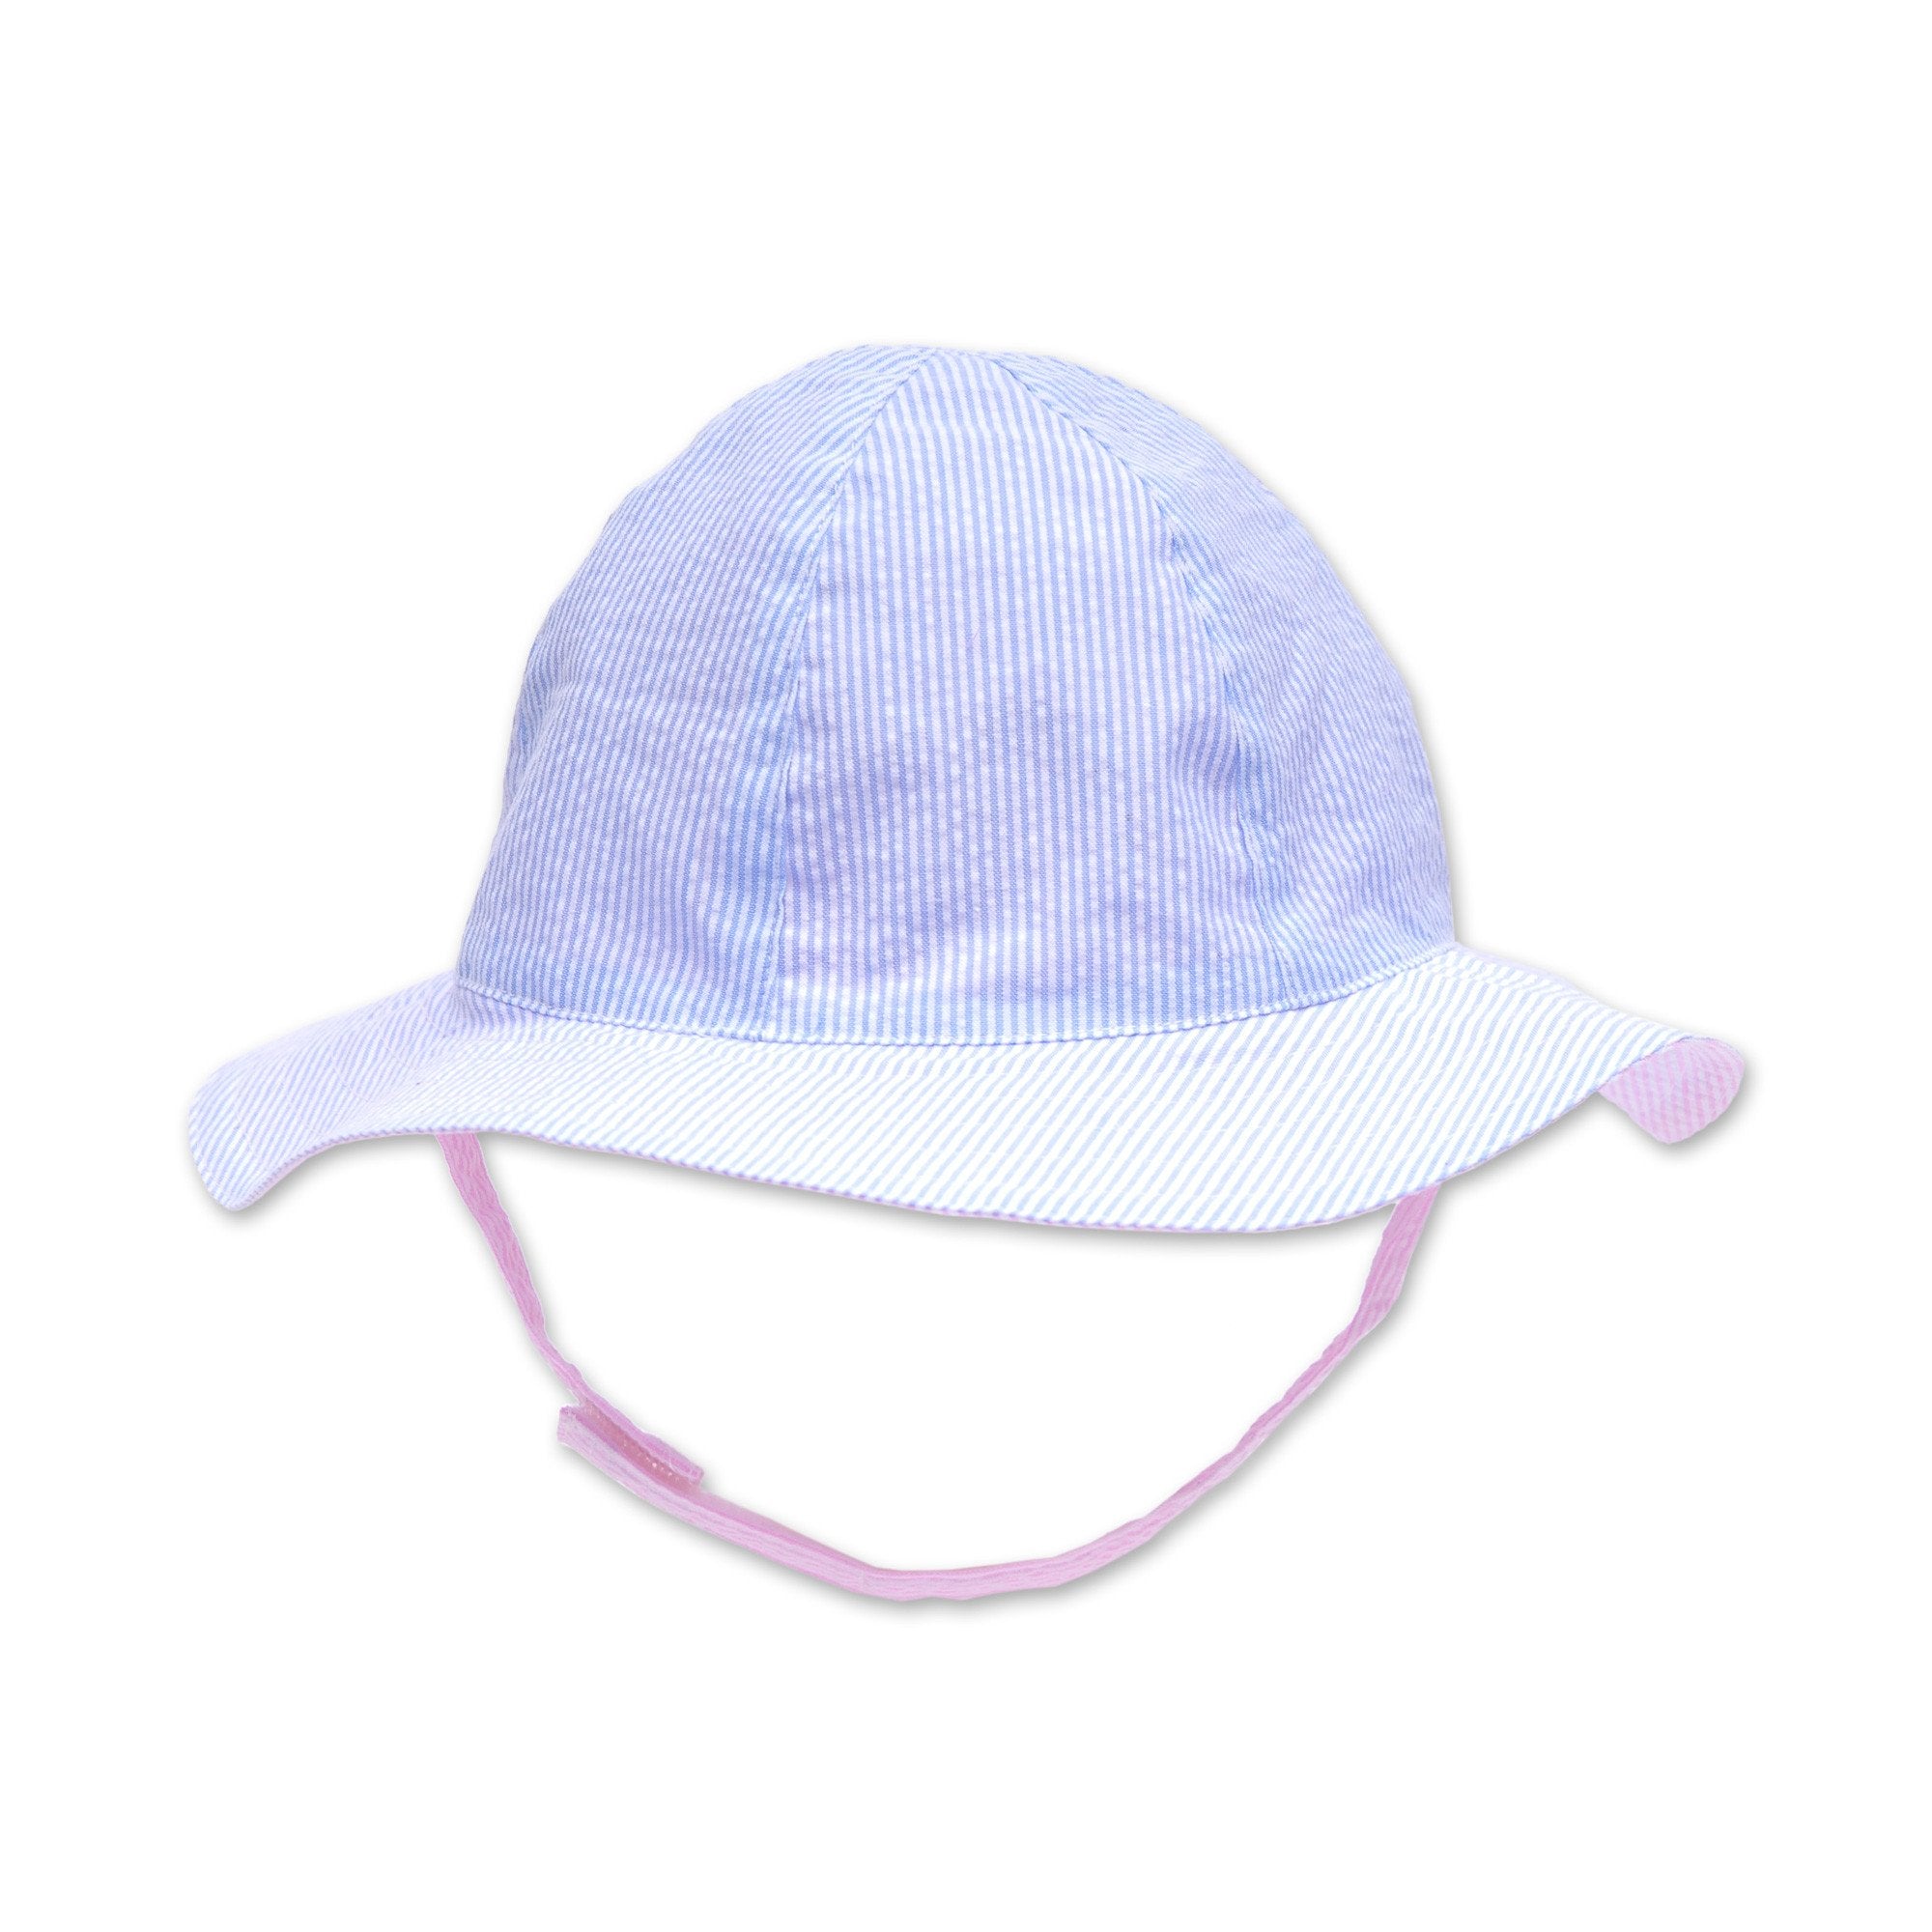 Florrie Hat In Blue And White Pin Stripe - Cou Cou Baby